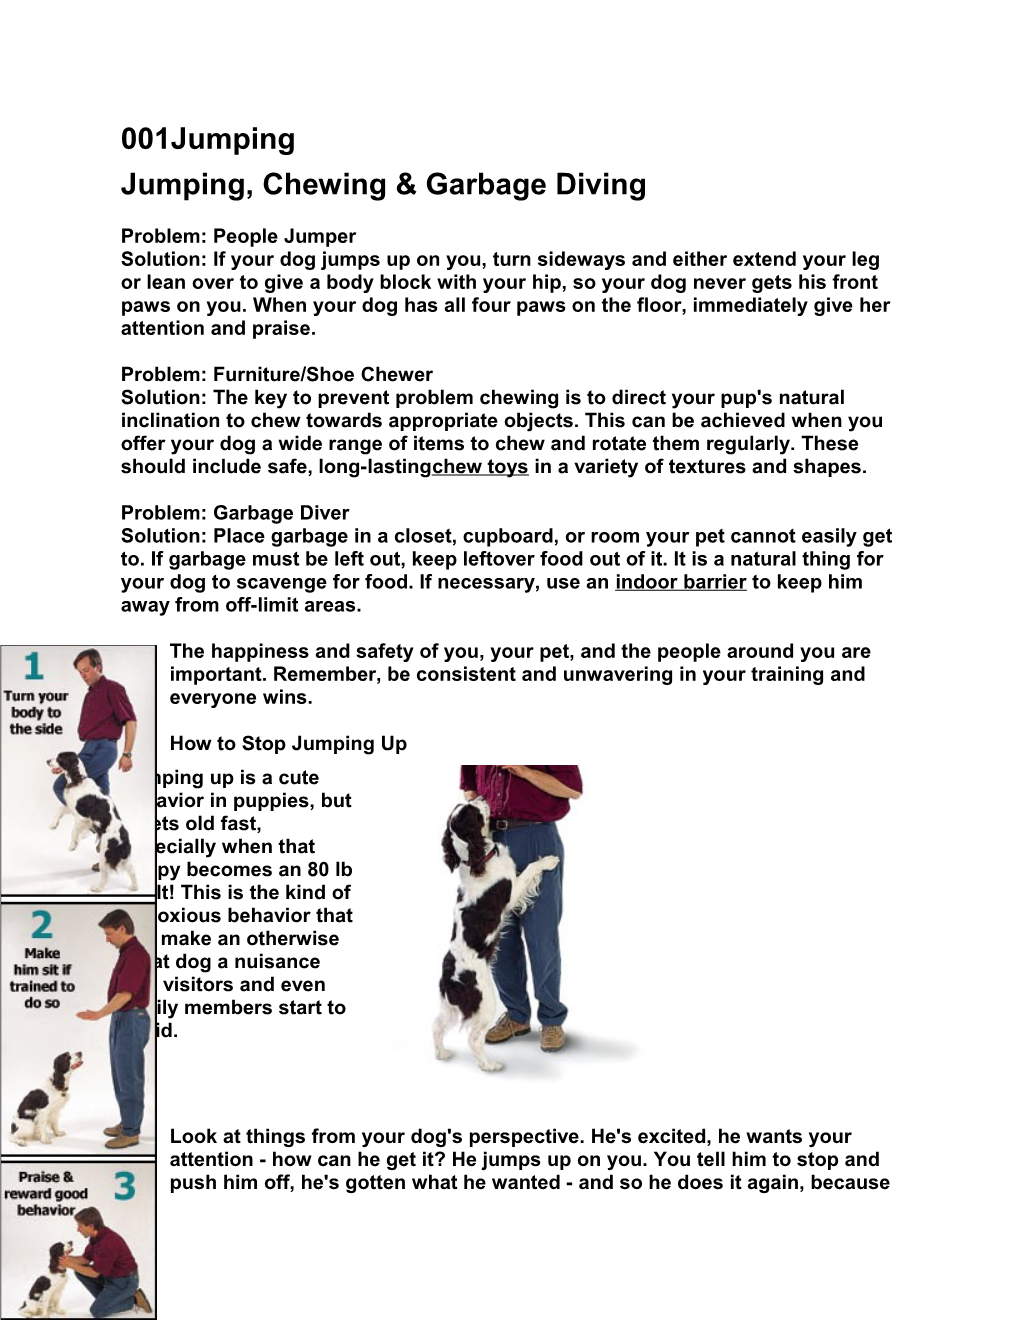 Jumping, Chewing & Garbage Diving